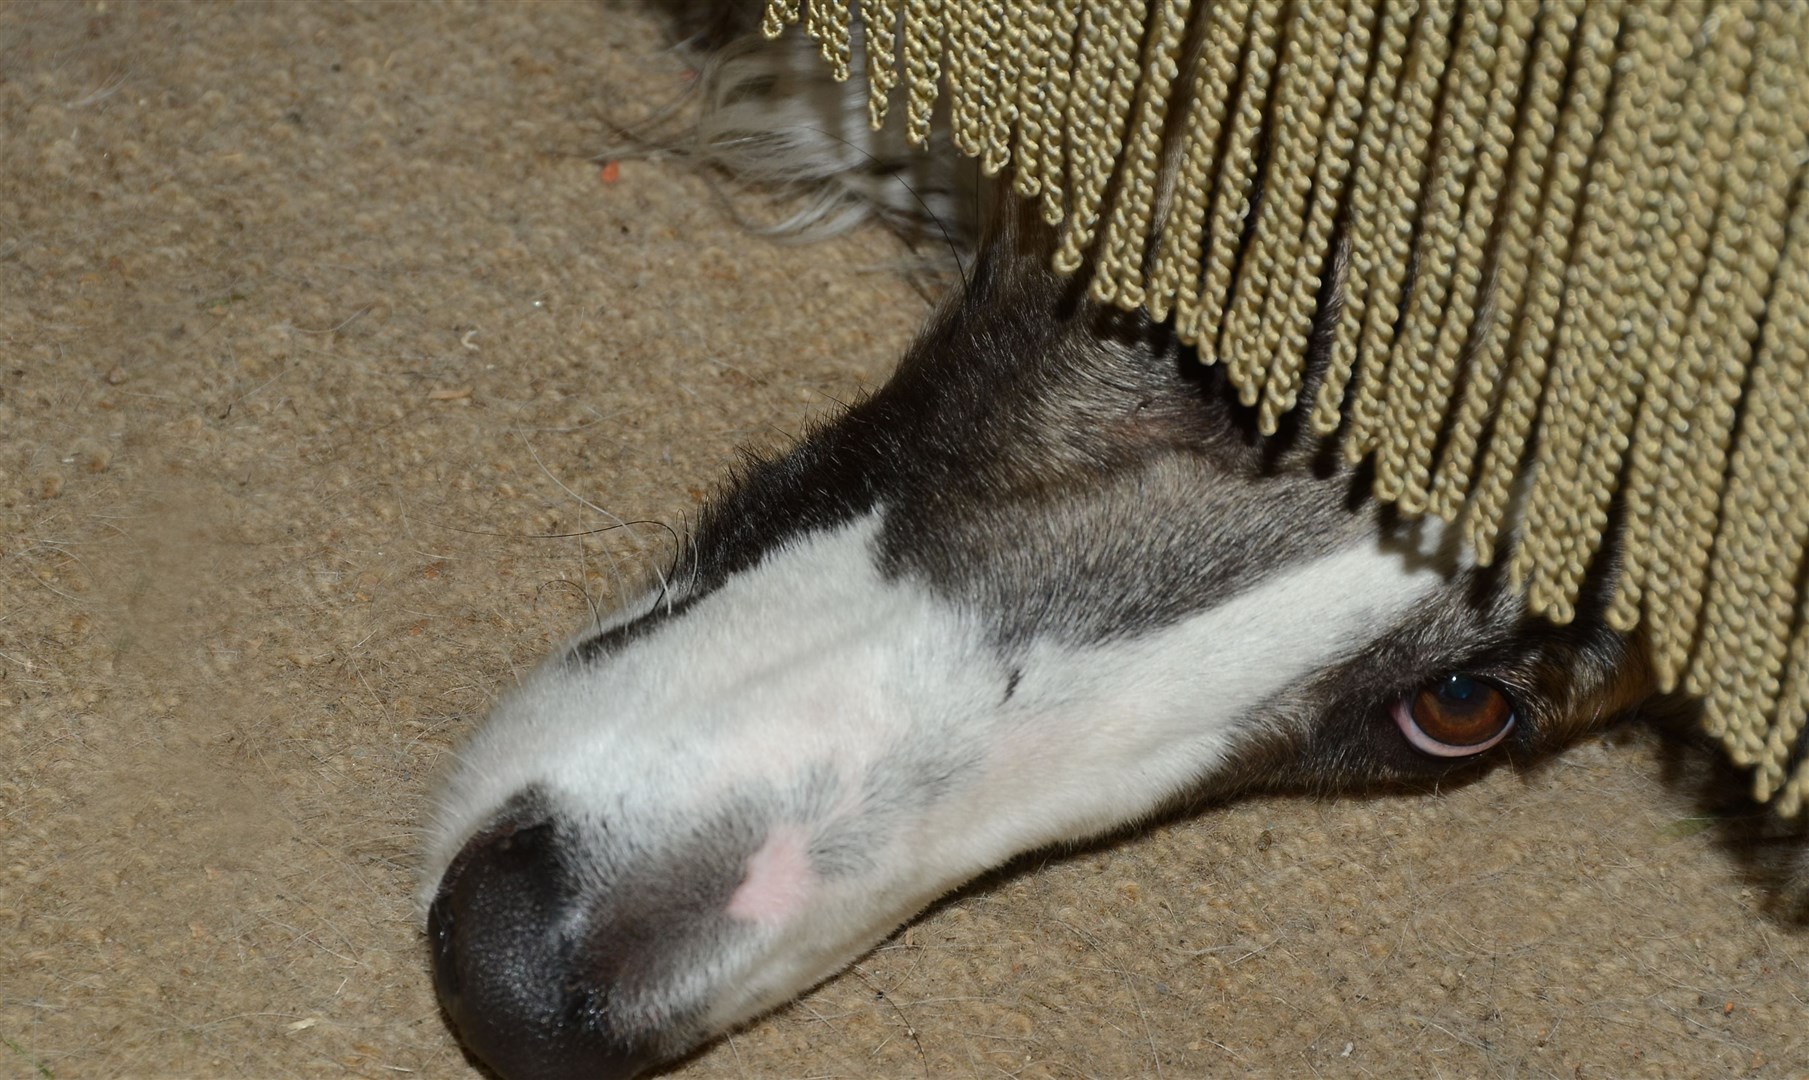 A dog hiding under a couch.